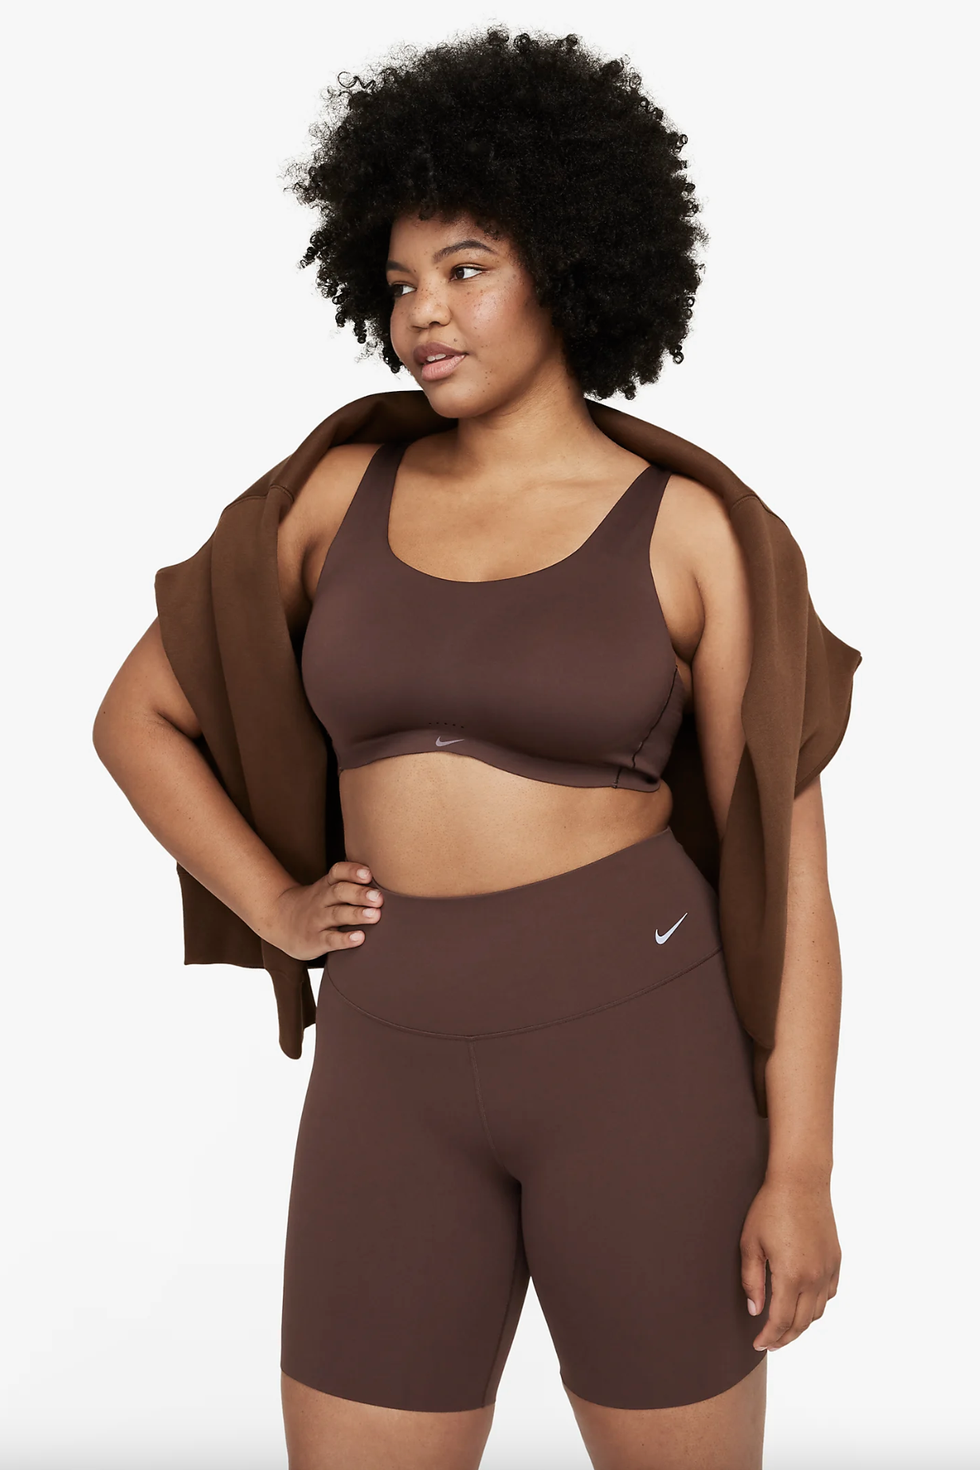 Plus-Size Workout Clothes That Will Slay You With Style  Plus size  athletic wear, Workout clothes, Fitness fashion outfits